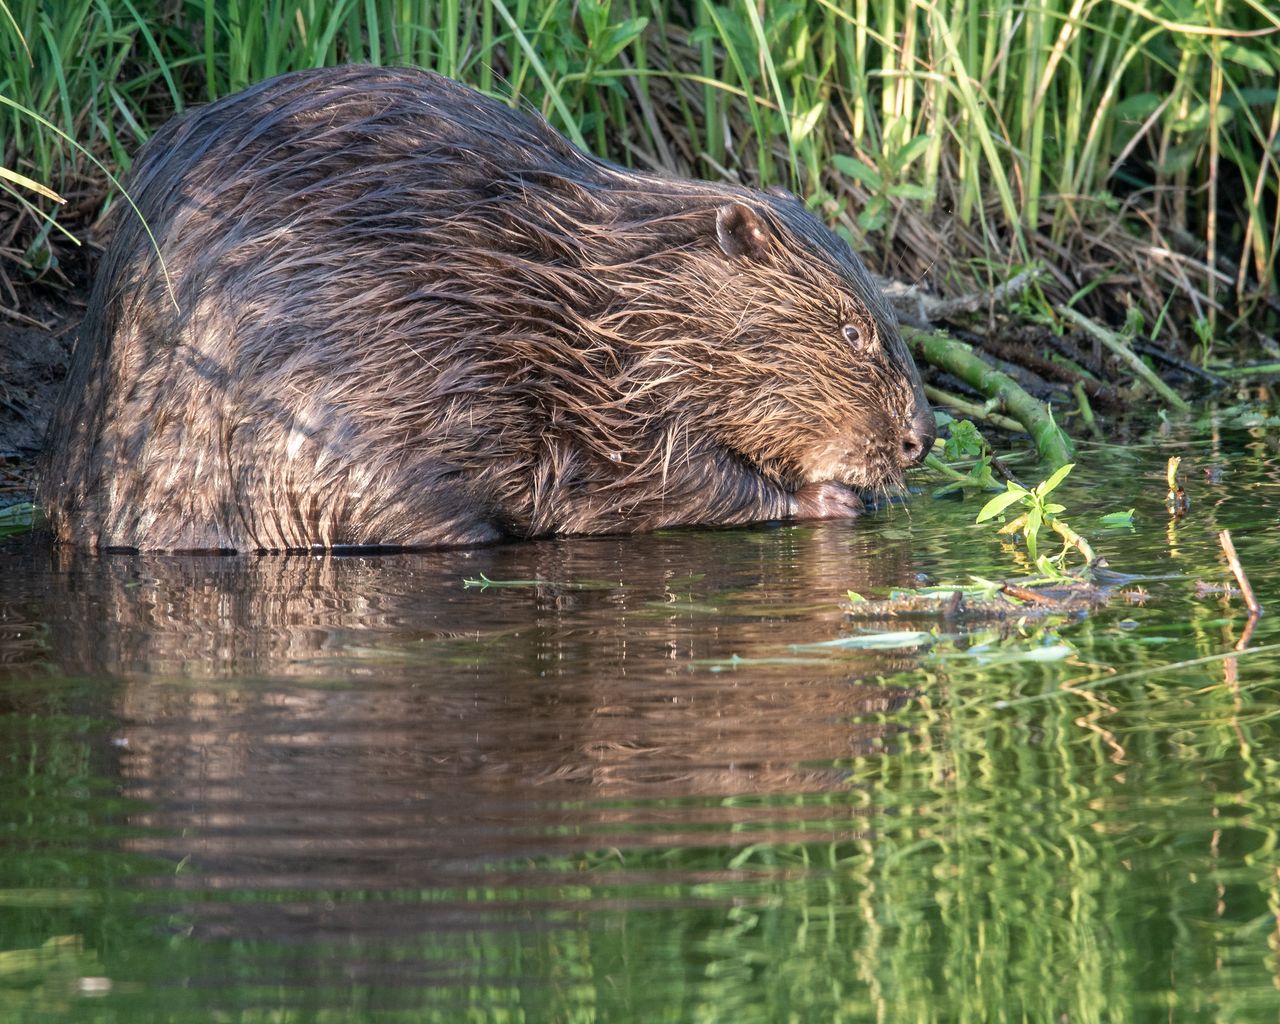 Beavers are causing a lot of damage to Croats.